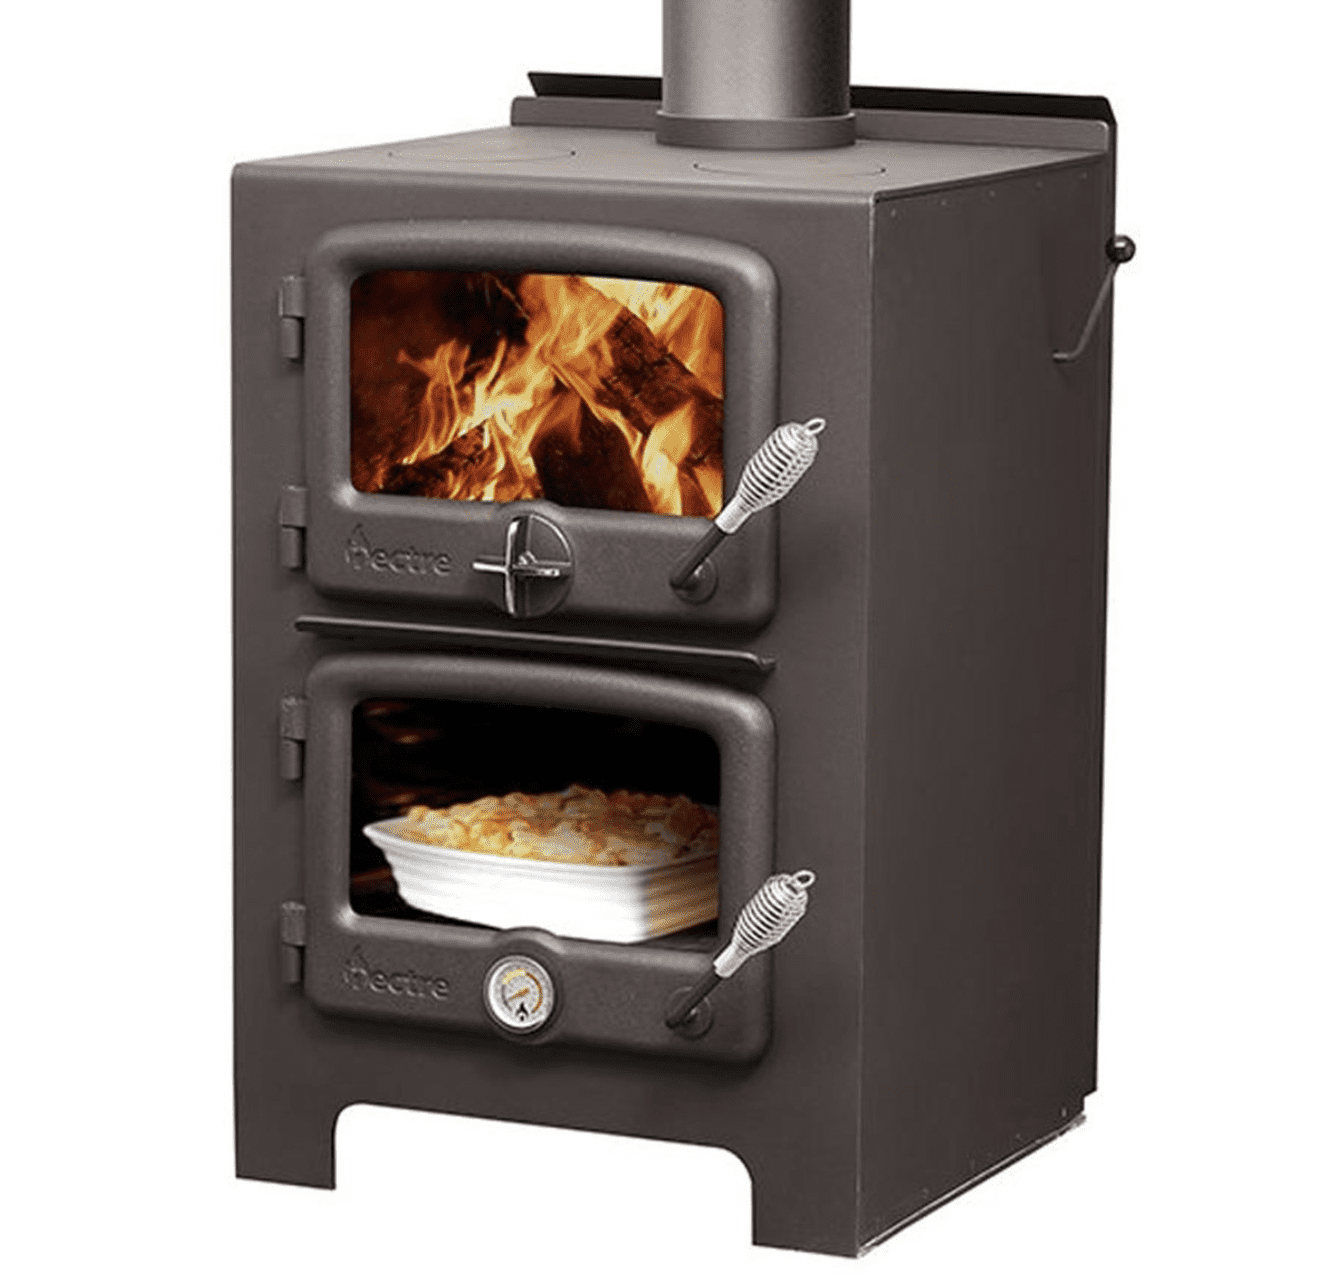 Nectre 350 wood stove with oven